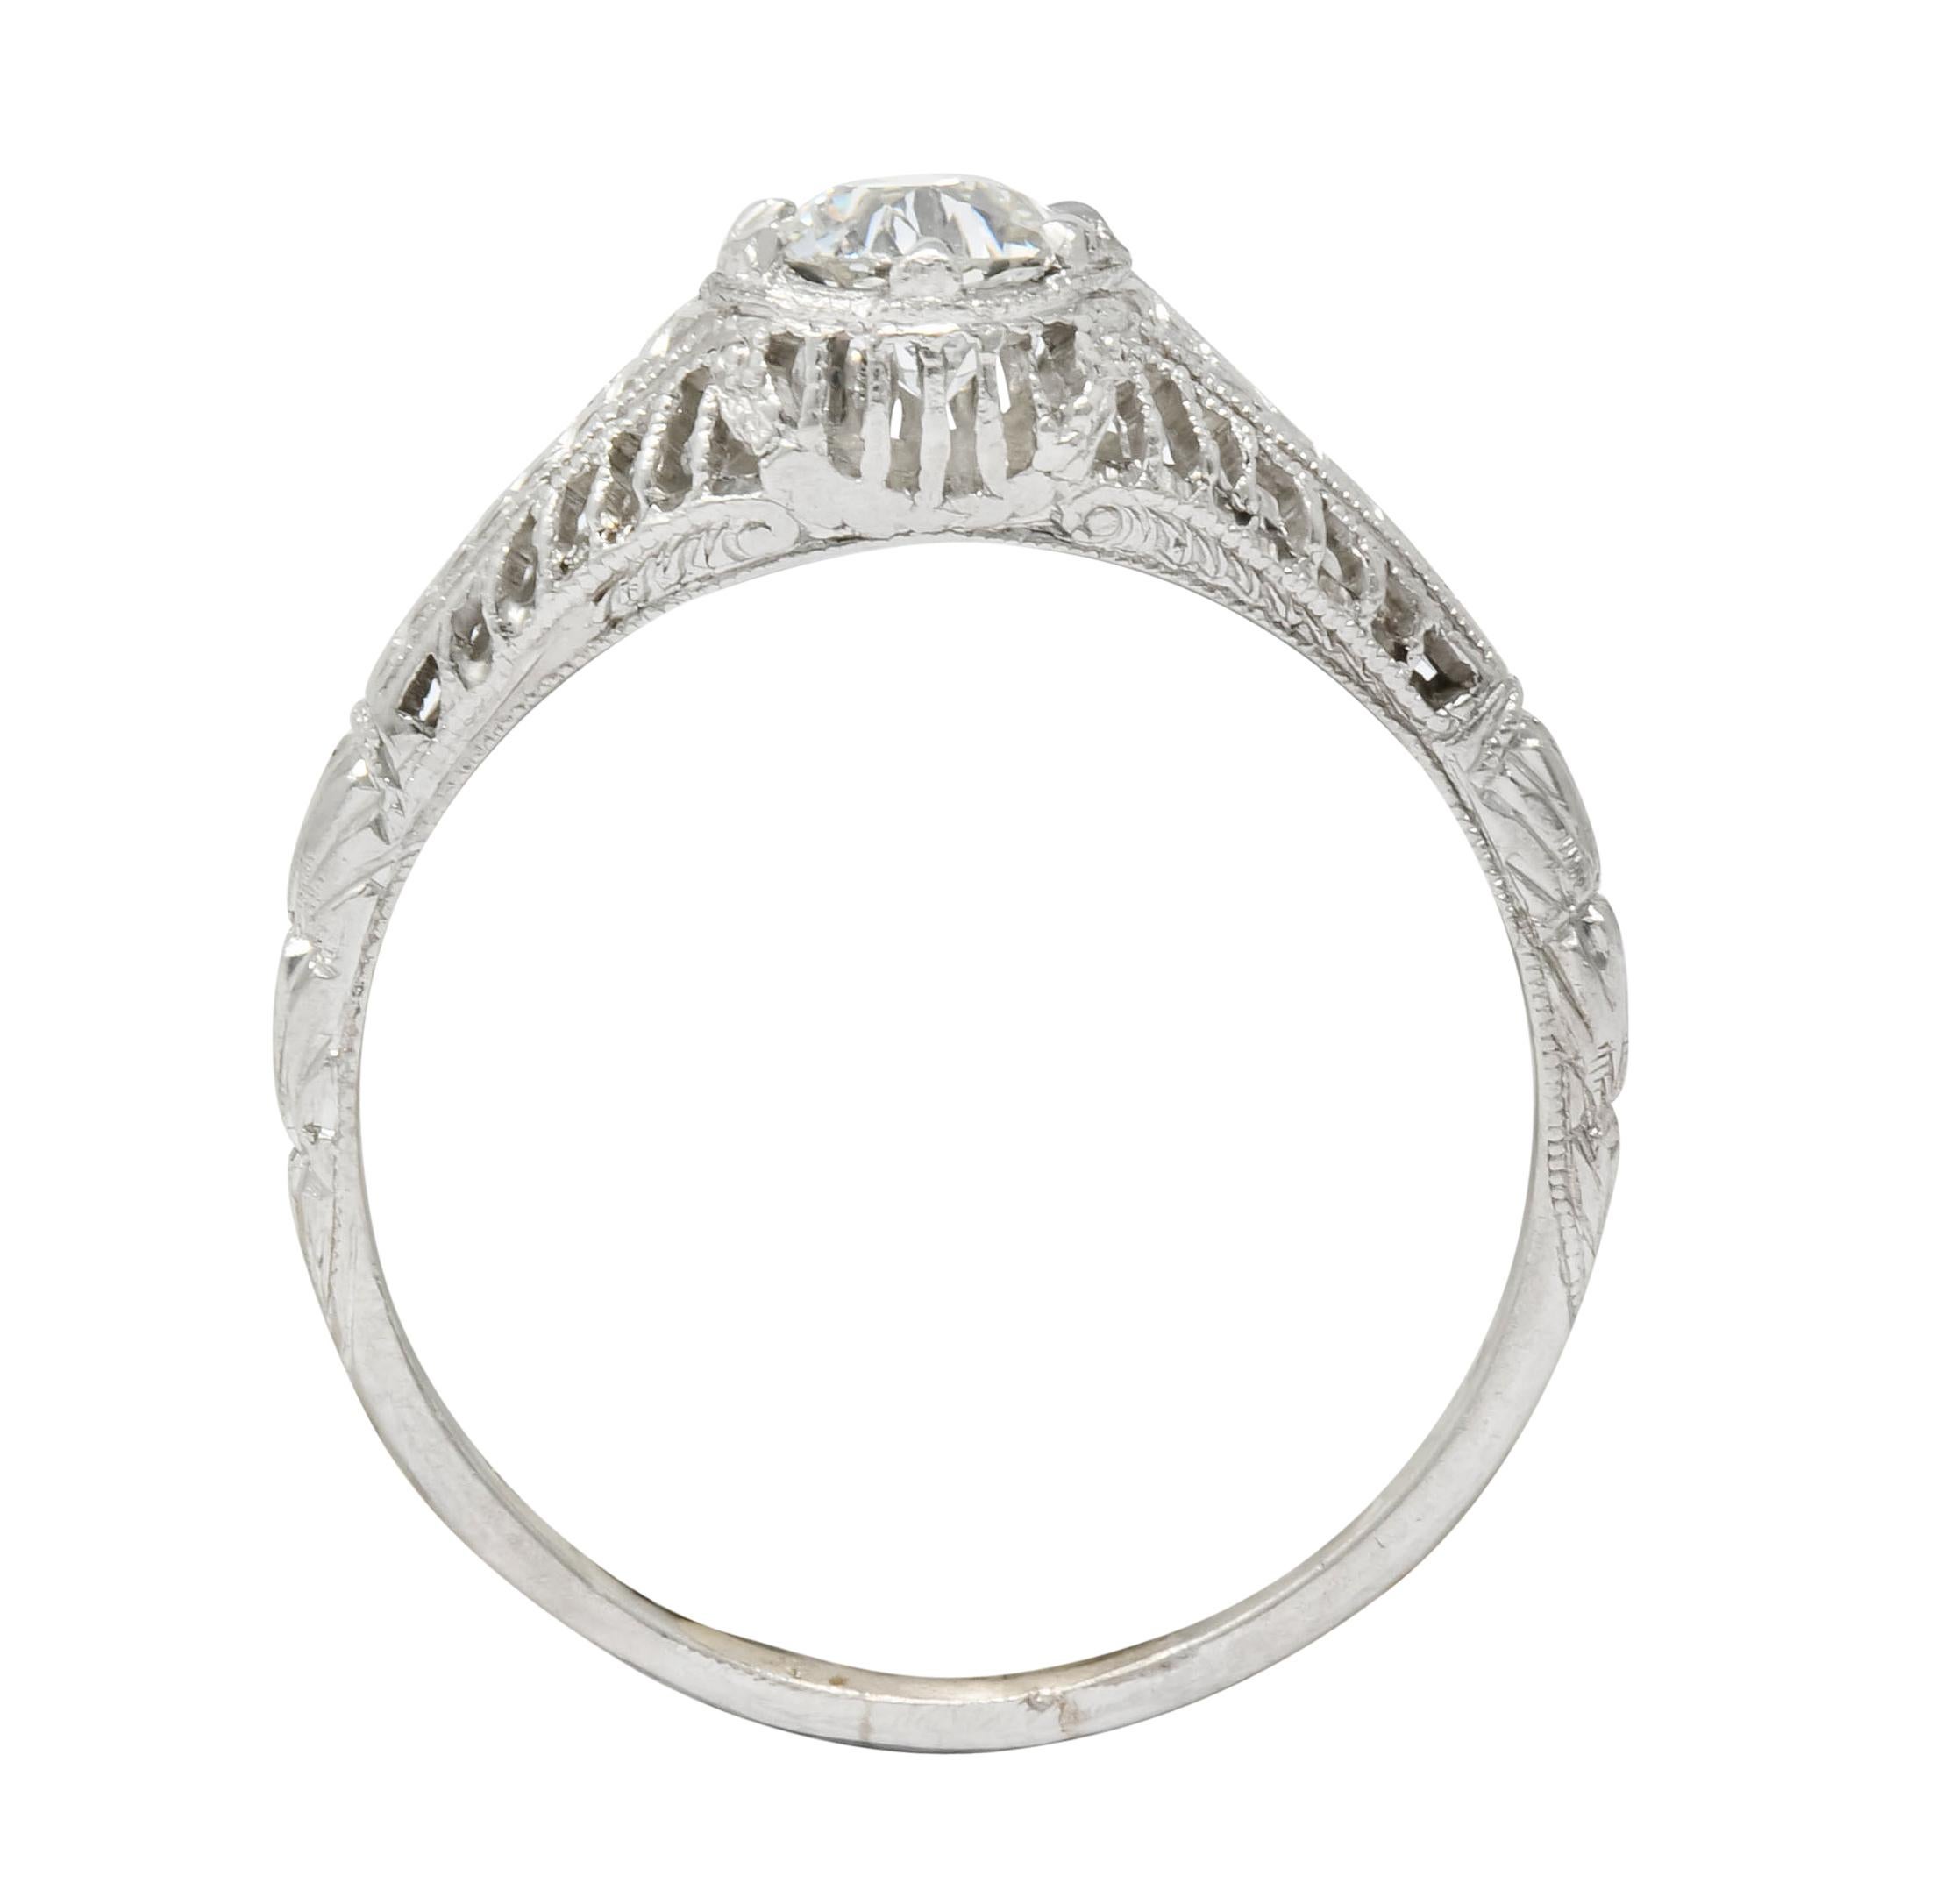 Centering a transitional cut diamond weighing approximately 0.50 carat, J color and VS clarity

Talon set low in mounting with pierced striated gallery and milgrain detail

Flanked by linear foliate motif flowing to deeply engraved shoulders

With